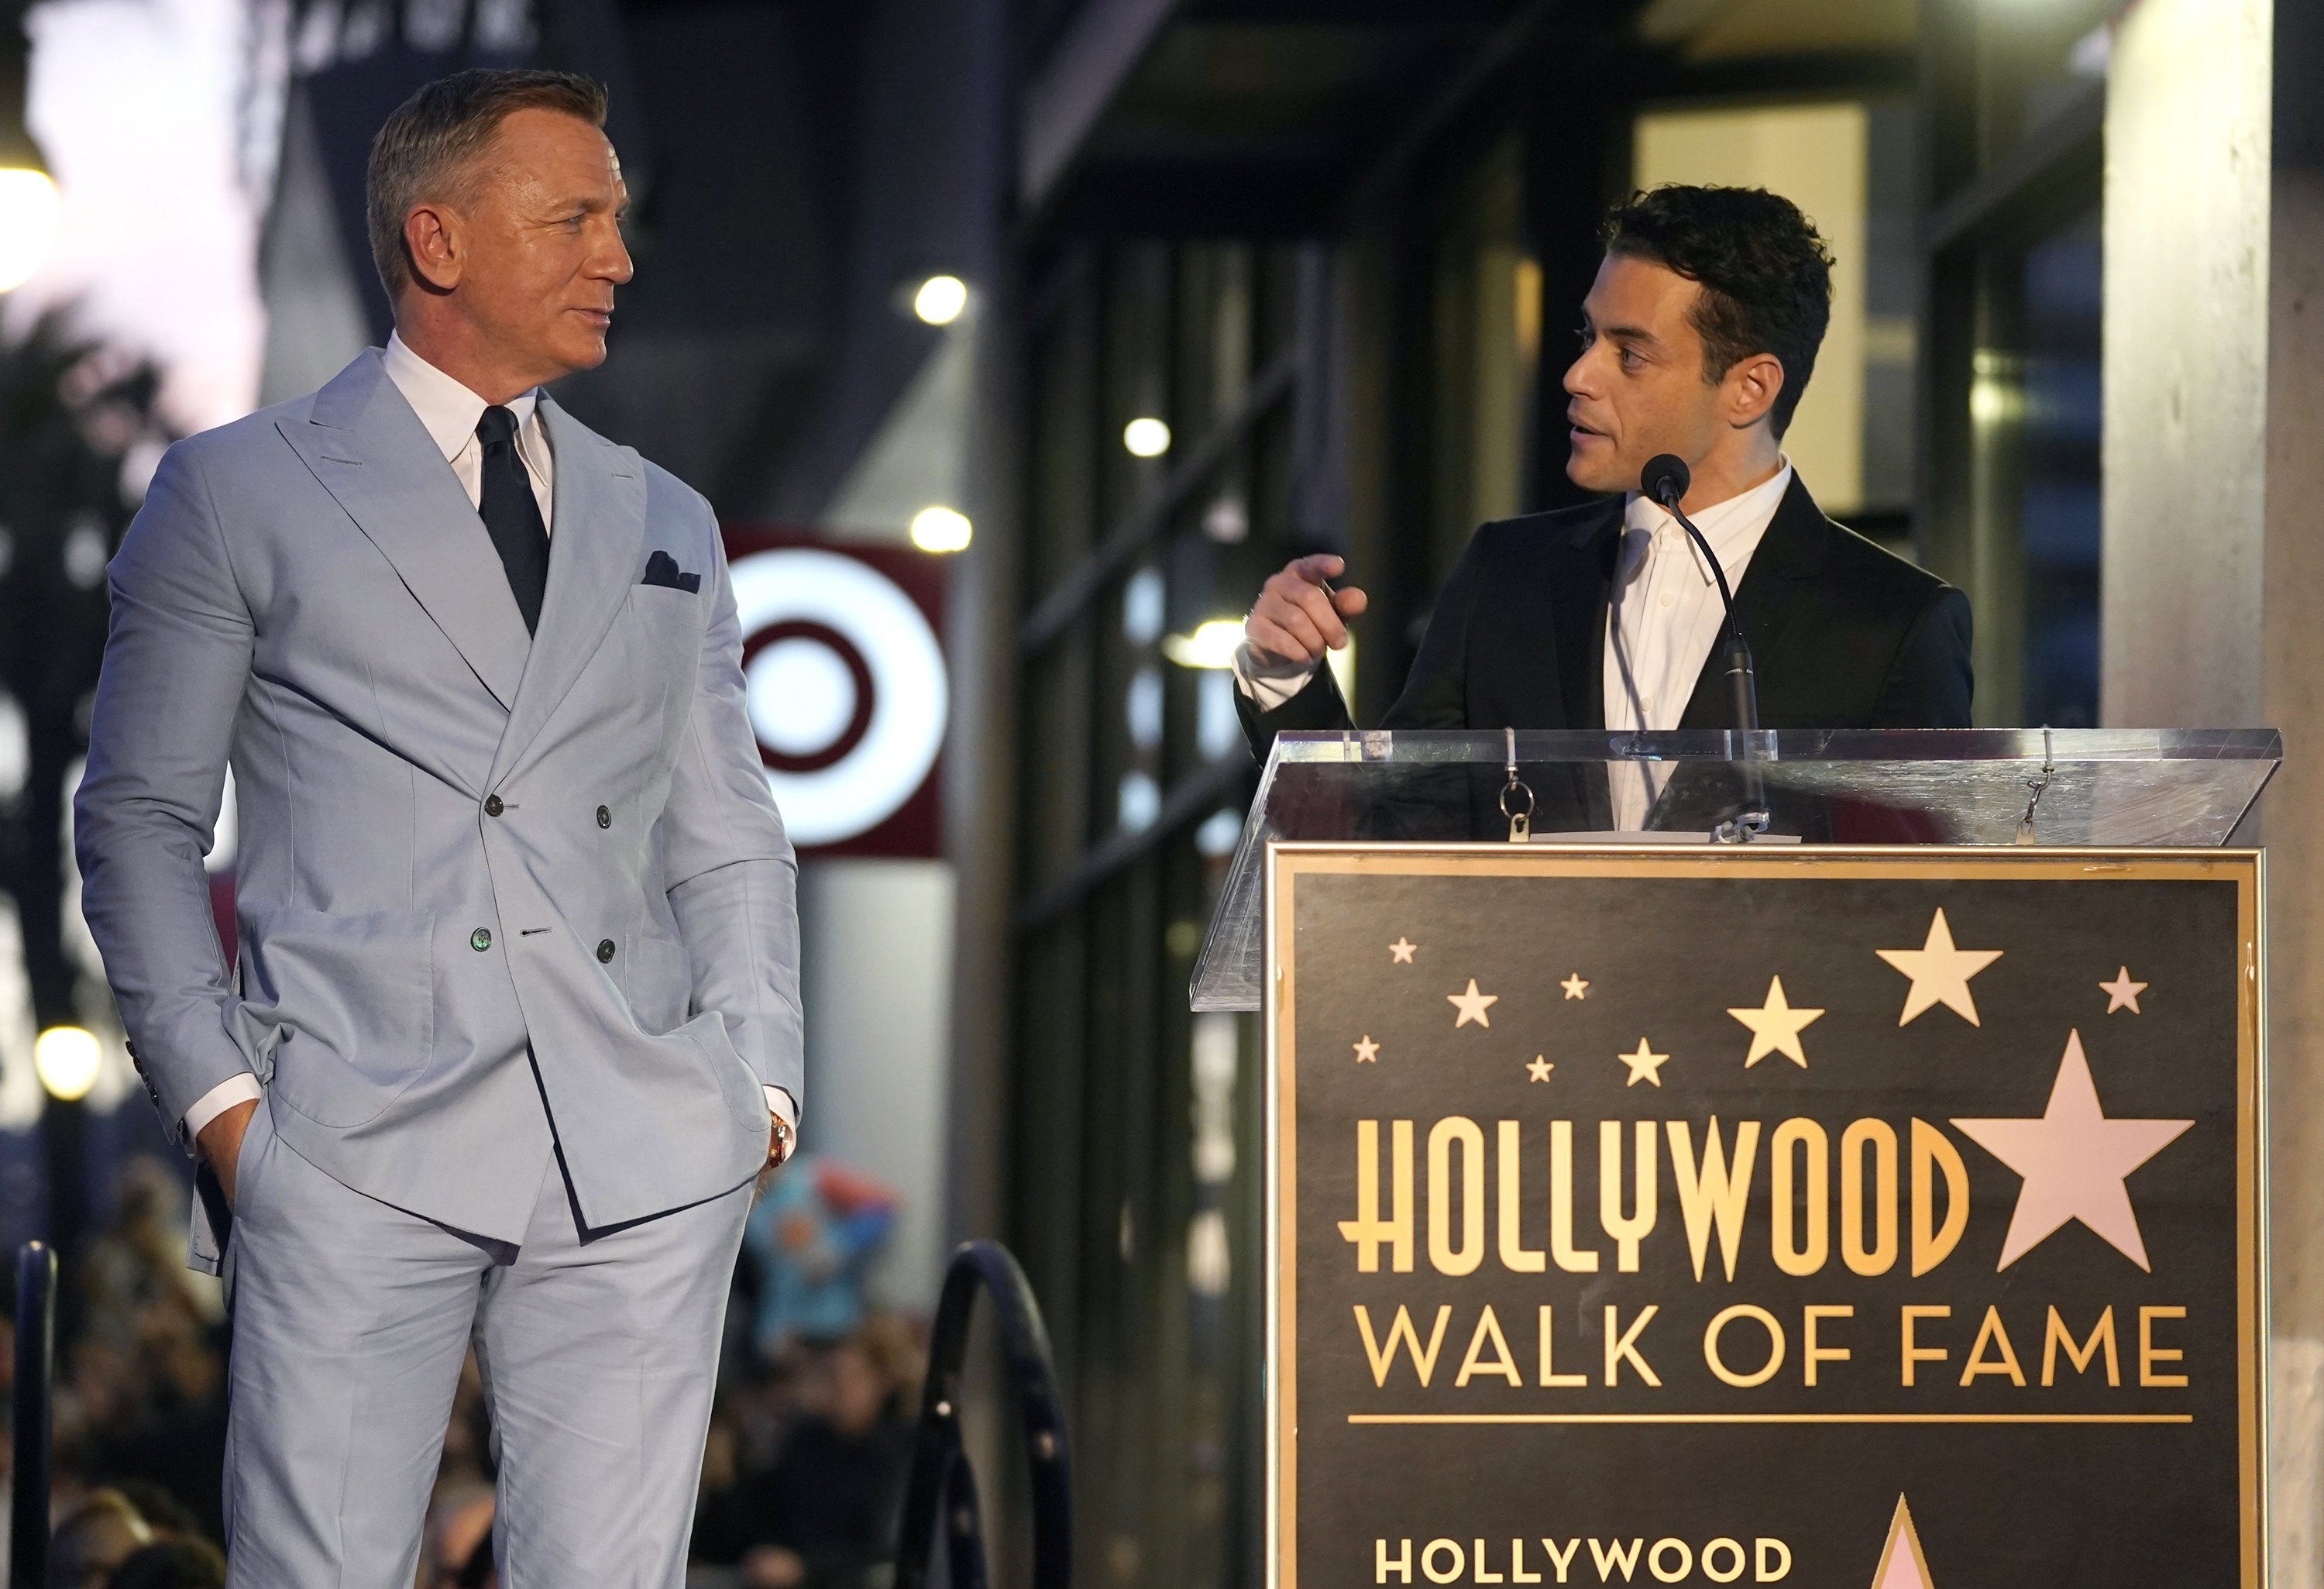 Rami Malek speaks as Daniel Craig looks on during a ceremony honoring Craig with a star on the Hollywood Walk of Fame, Los Angeles, California, U.S., Oct. 6, 2021. (AP Photo)